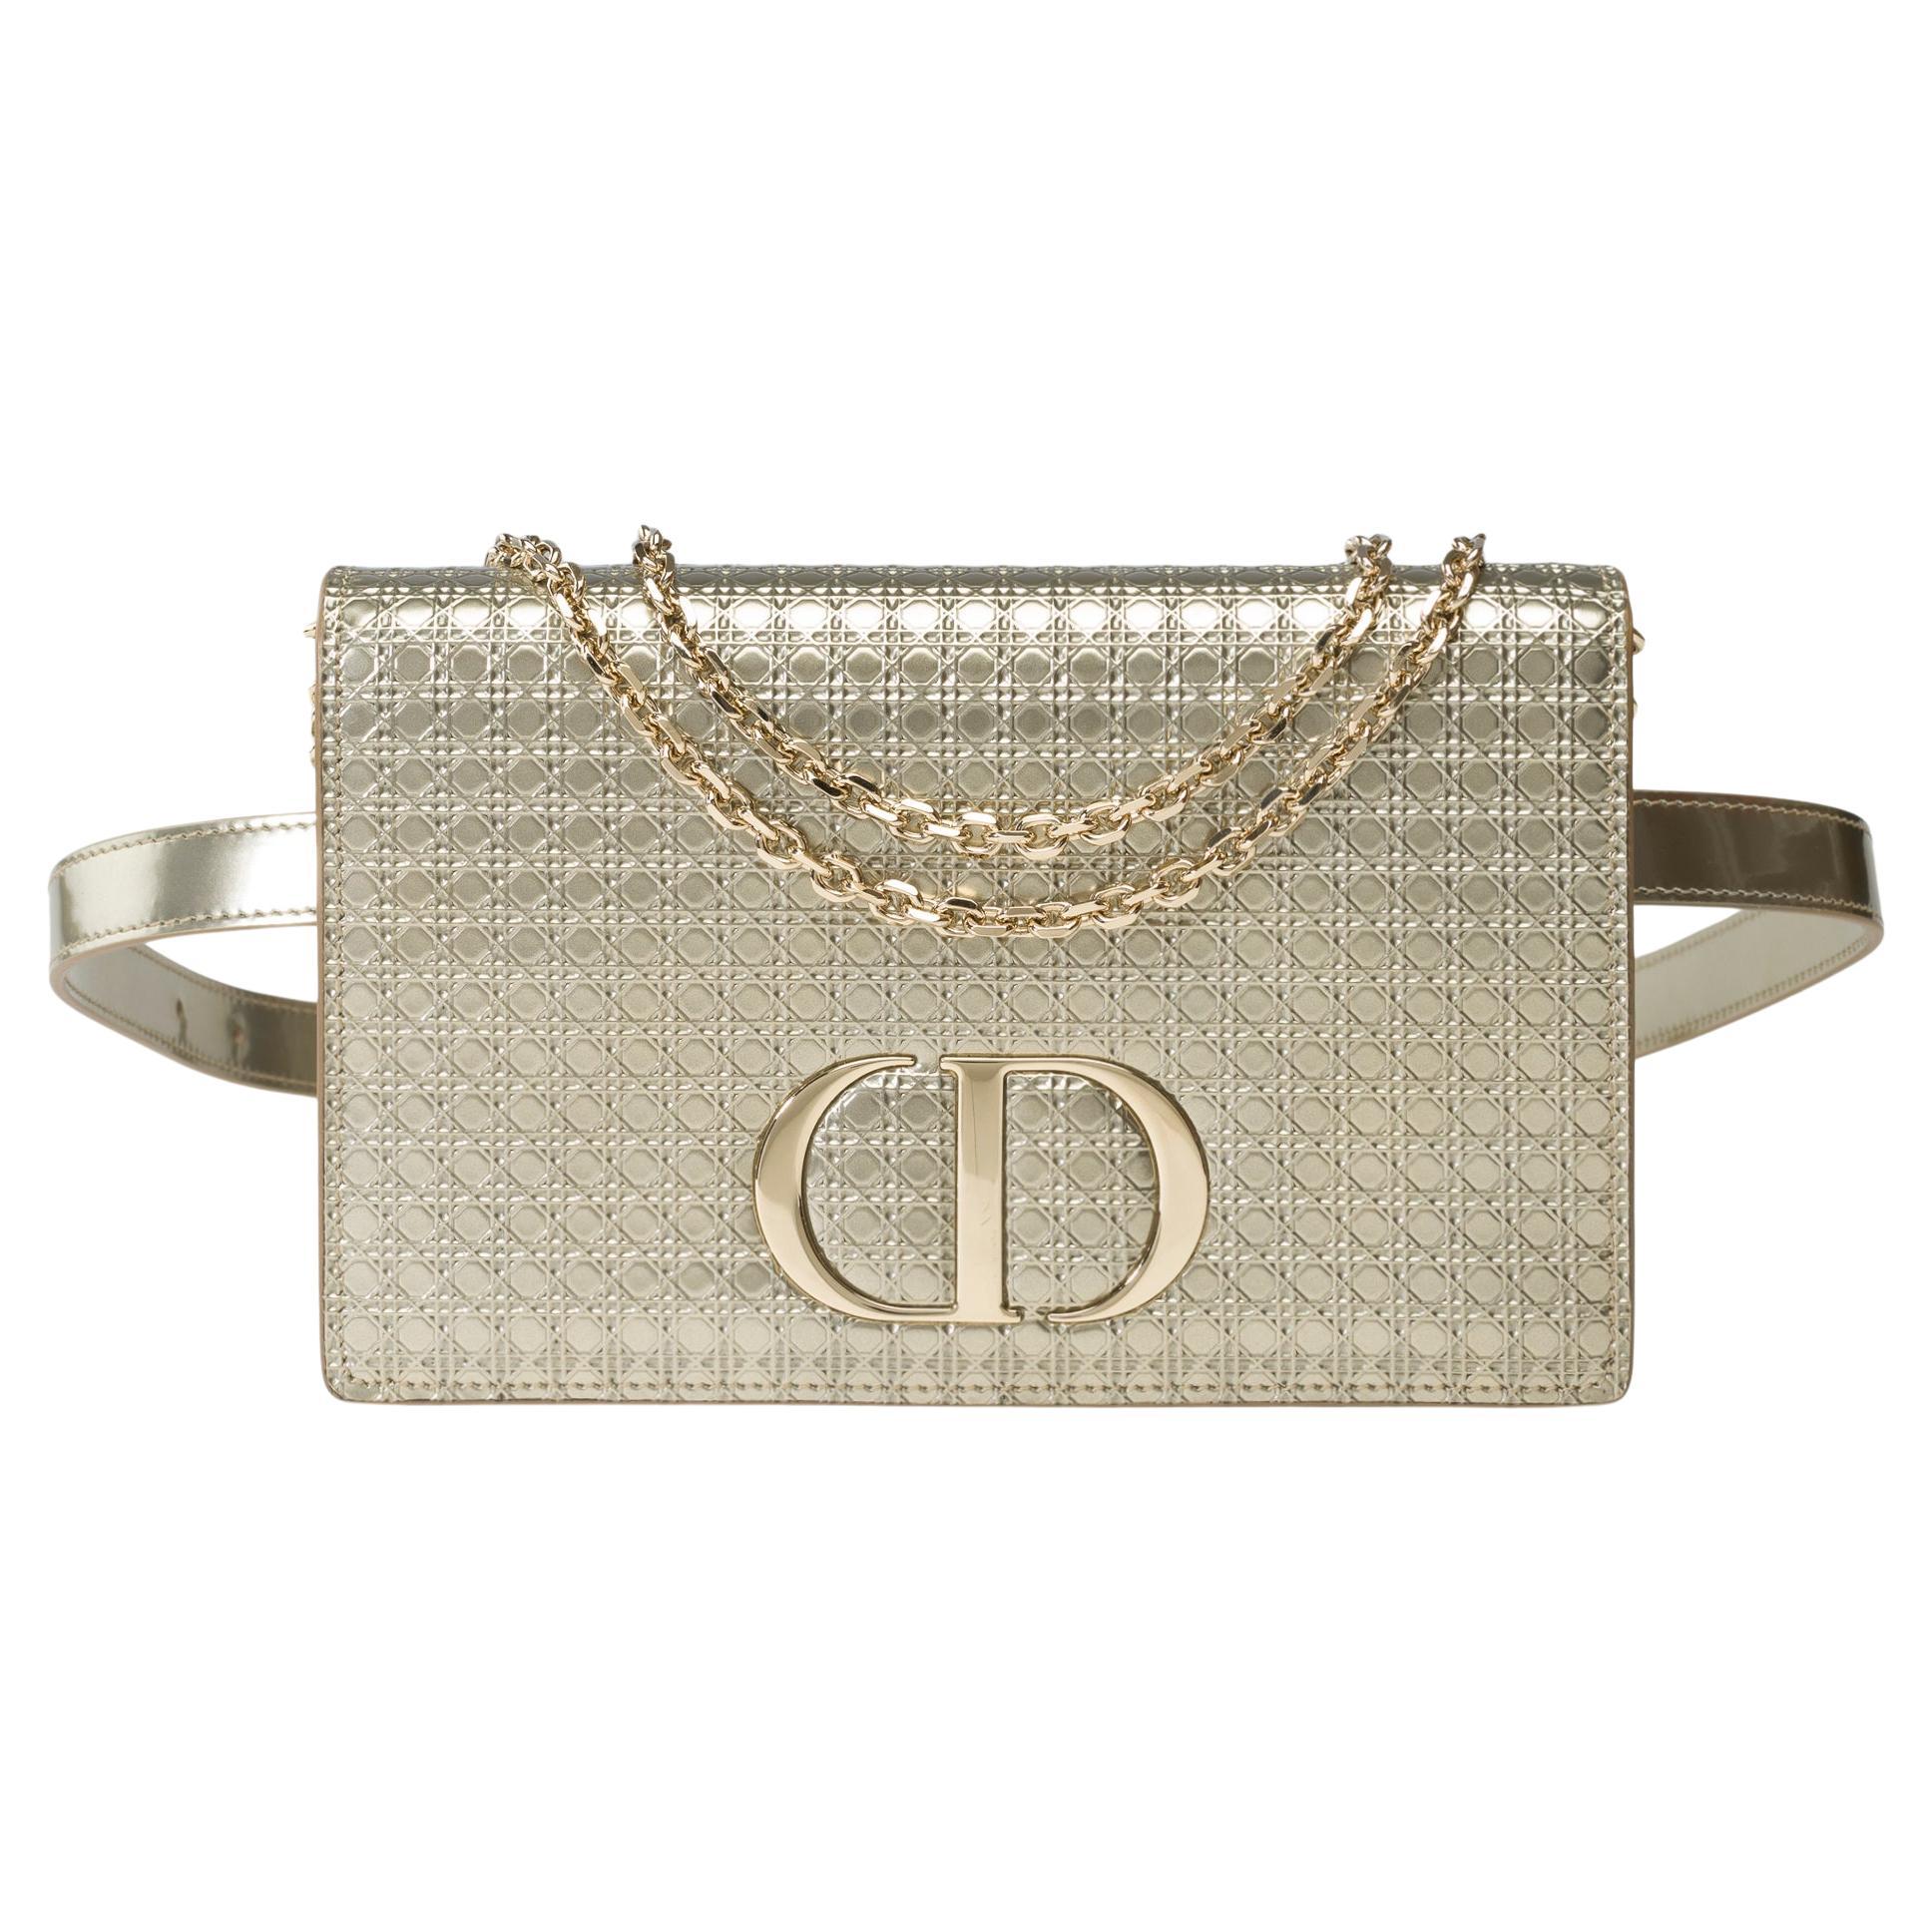 Christian Dior shoulder&belt bag 2 in 1 30 Montaigne in silver leather